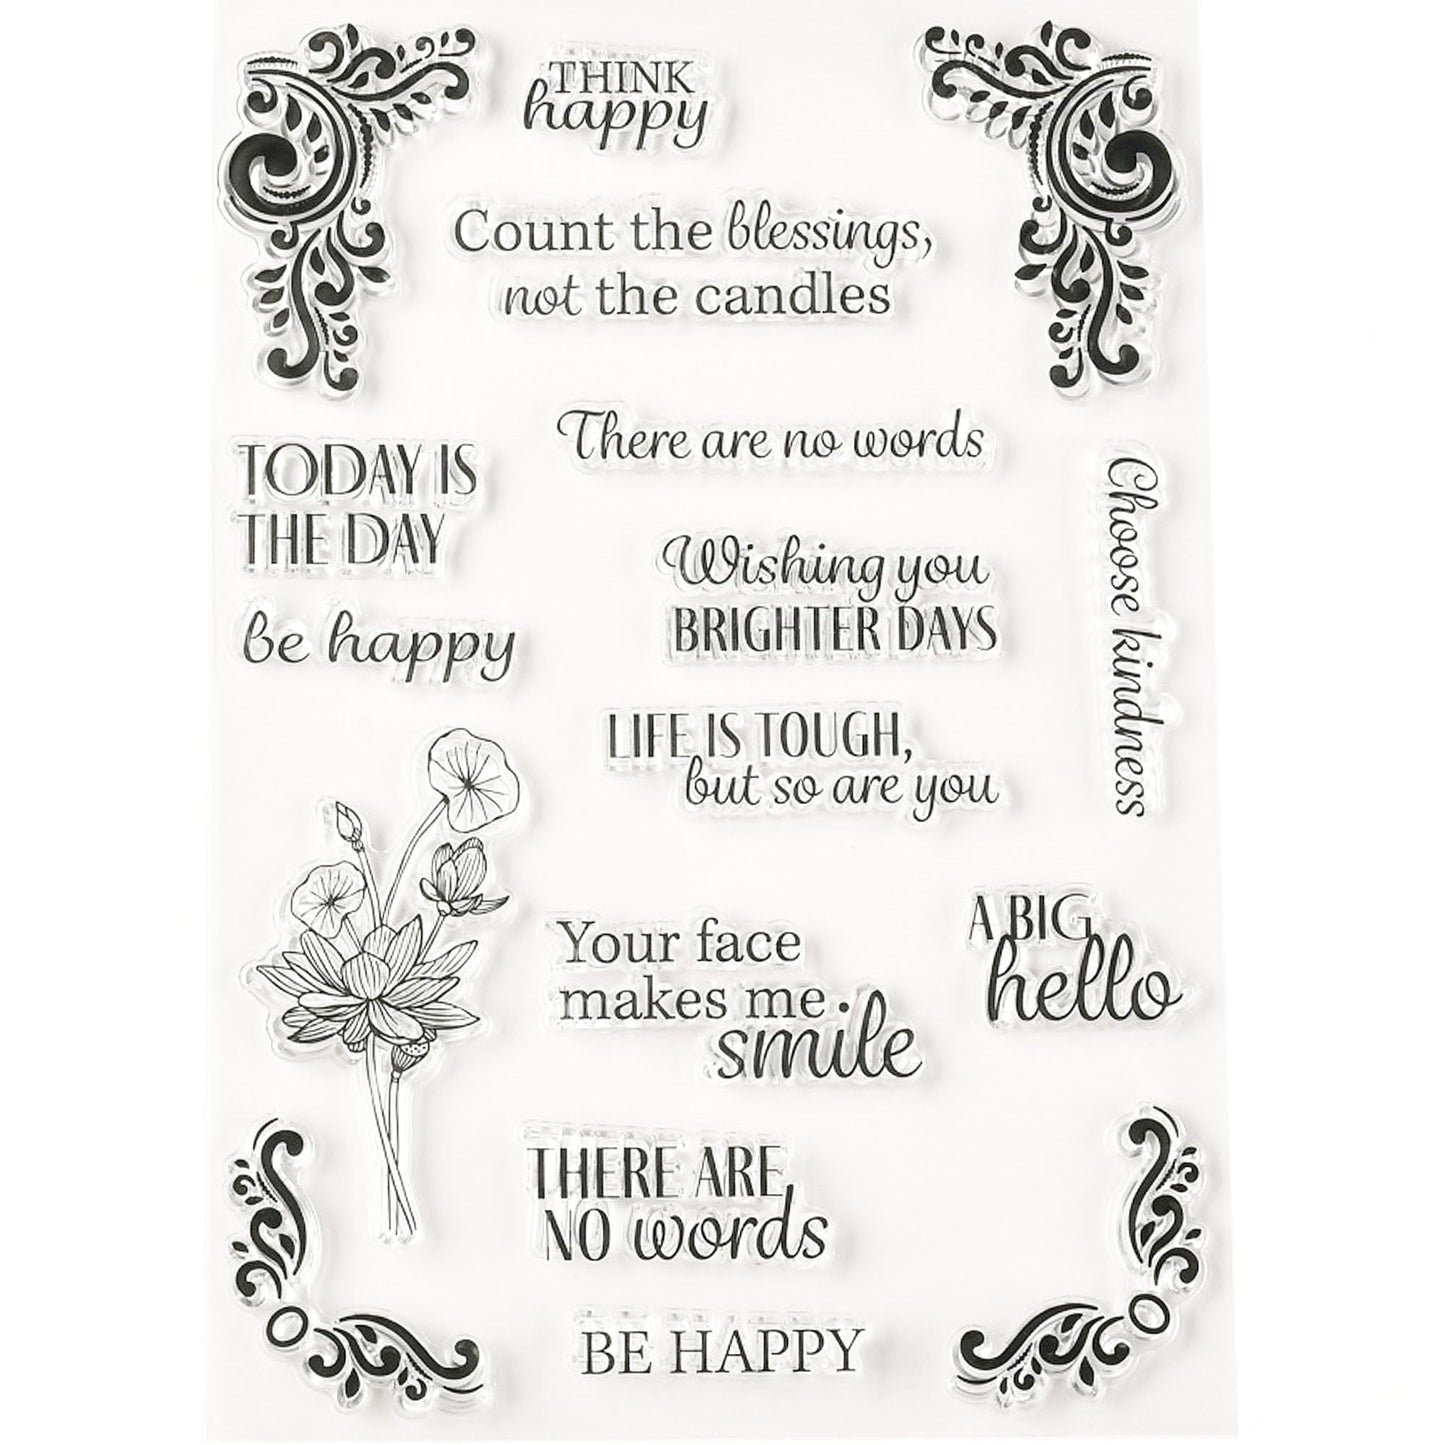 Count the Blessings Message Clear Stamp Silicone Rubber Scrapbooking Card Making